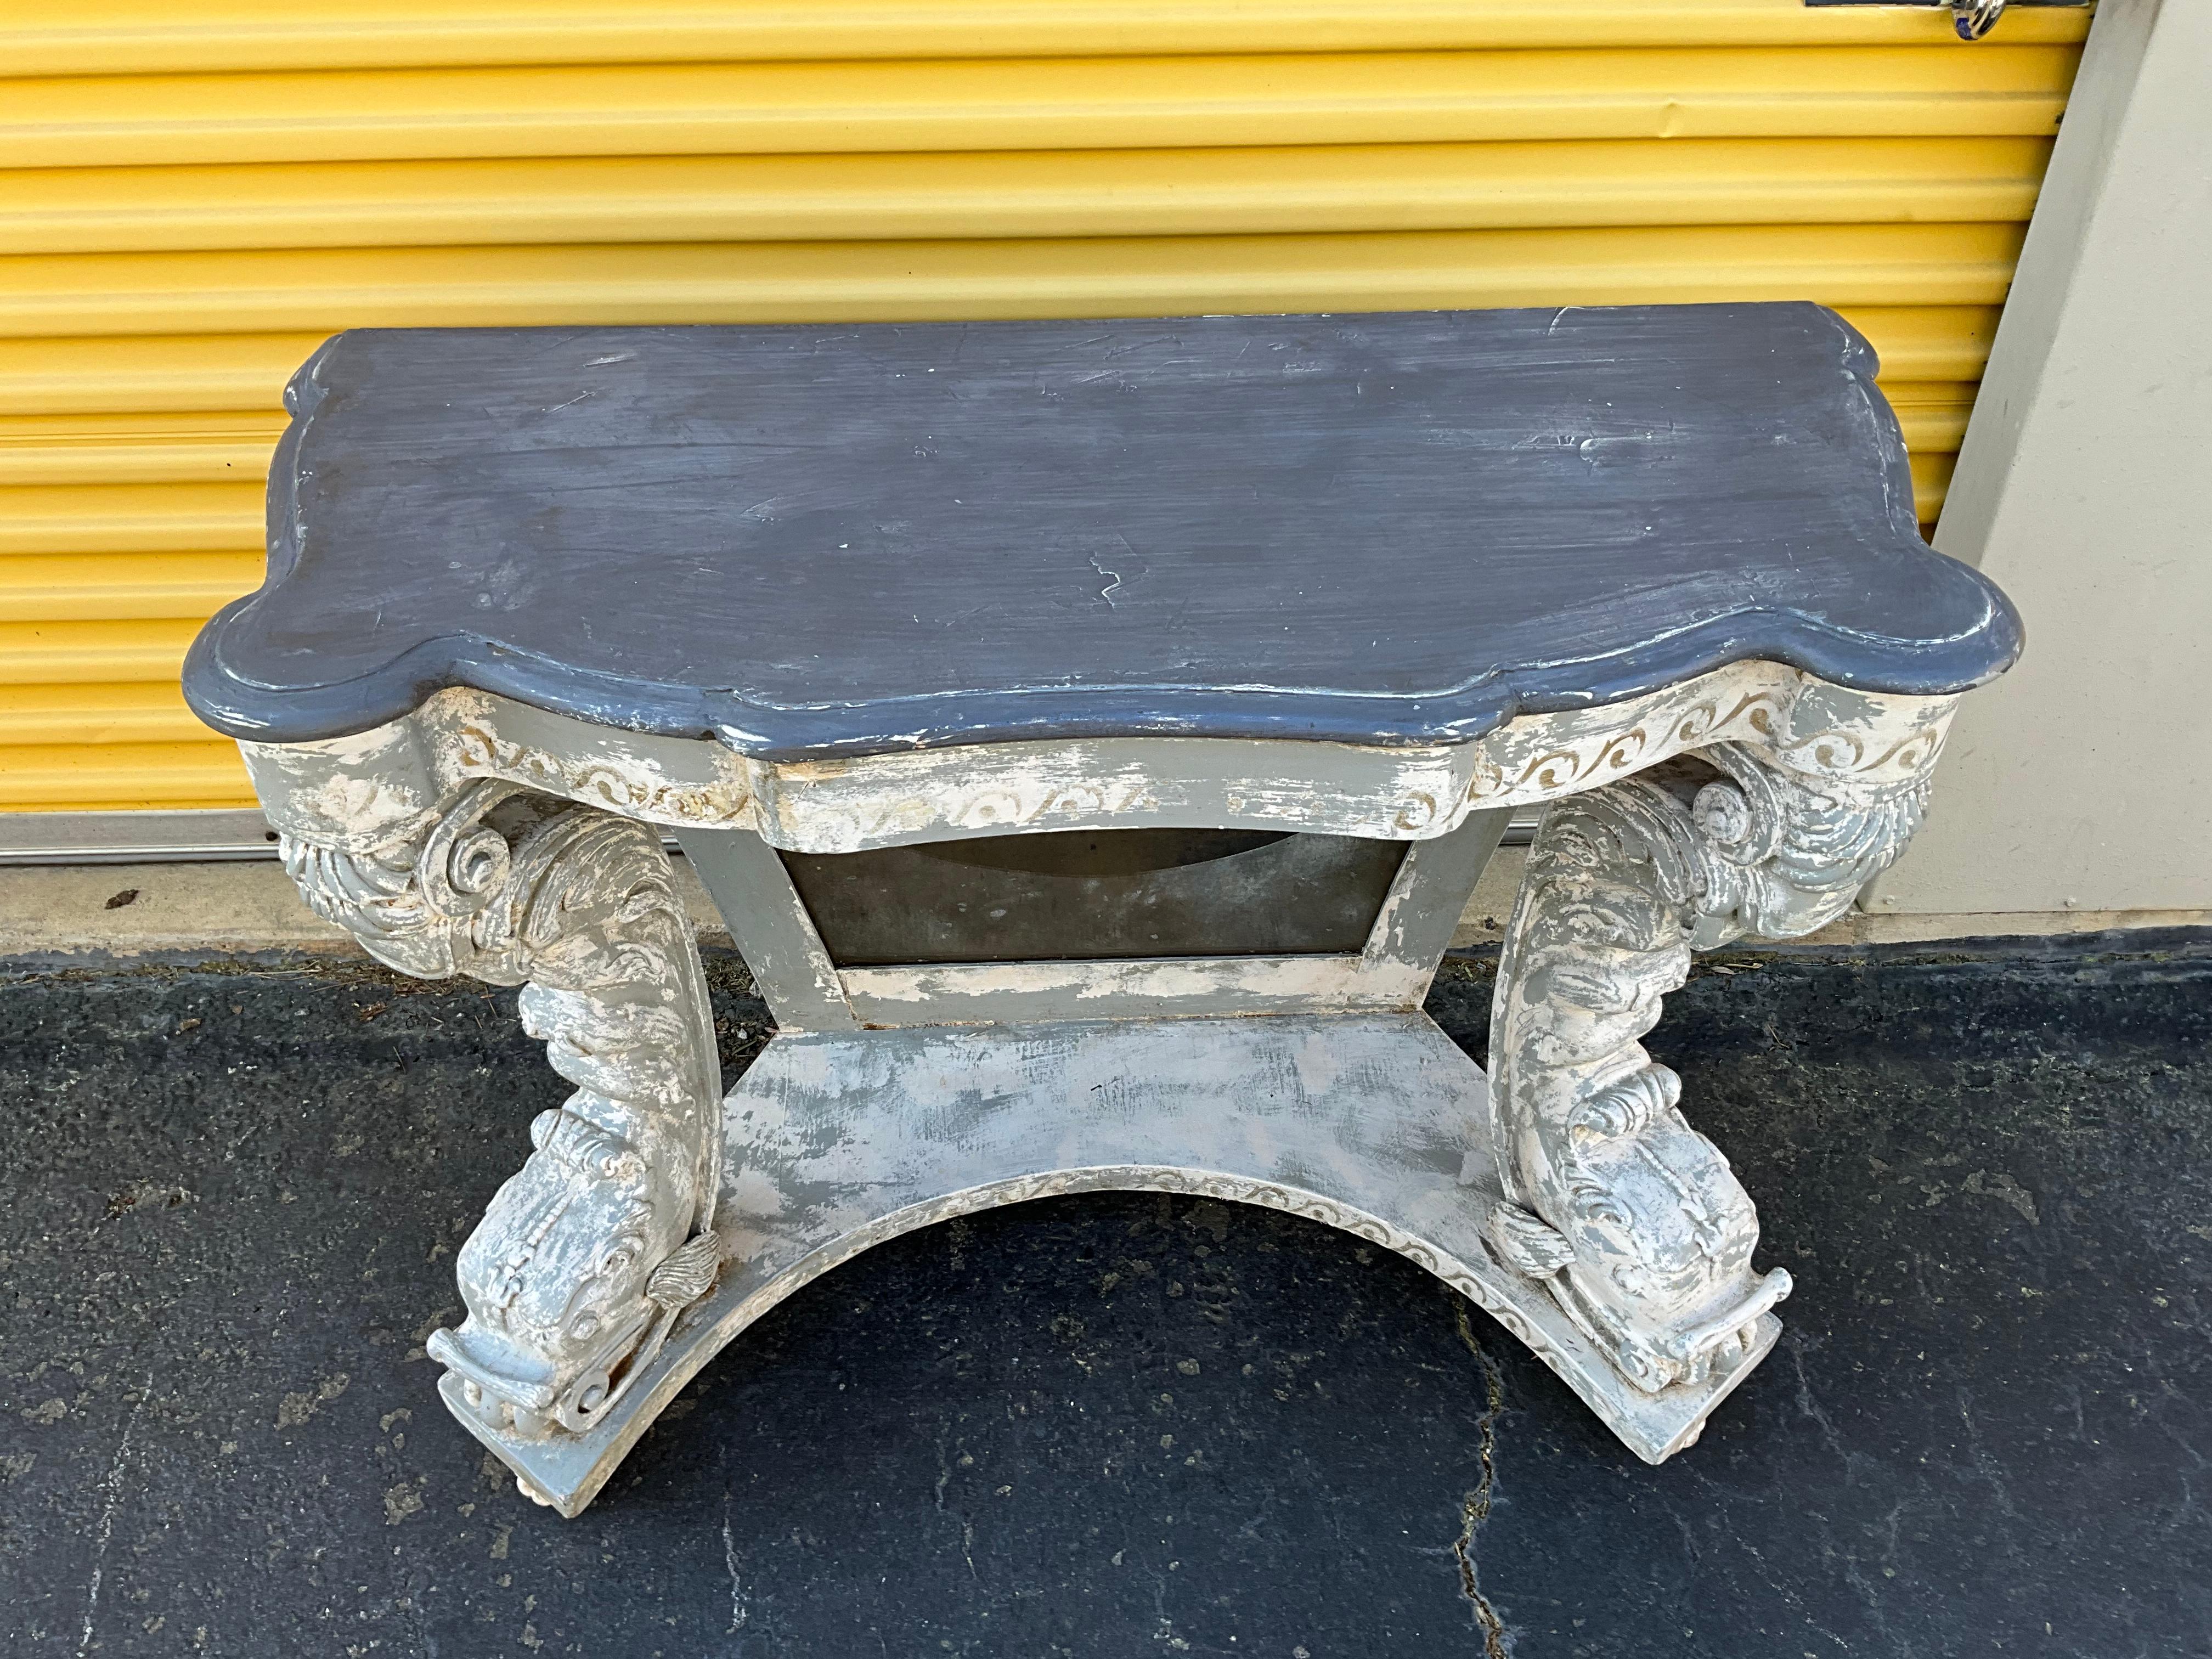 This is a pair of neo-classical style carved and hand painted console tables with distressed mirrored backs. The top has a serpentine form . The bases have dolphin / koi fish supports. They most likely are Italian mid-century finds. The consoles are